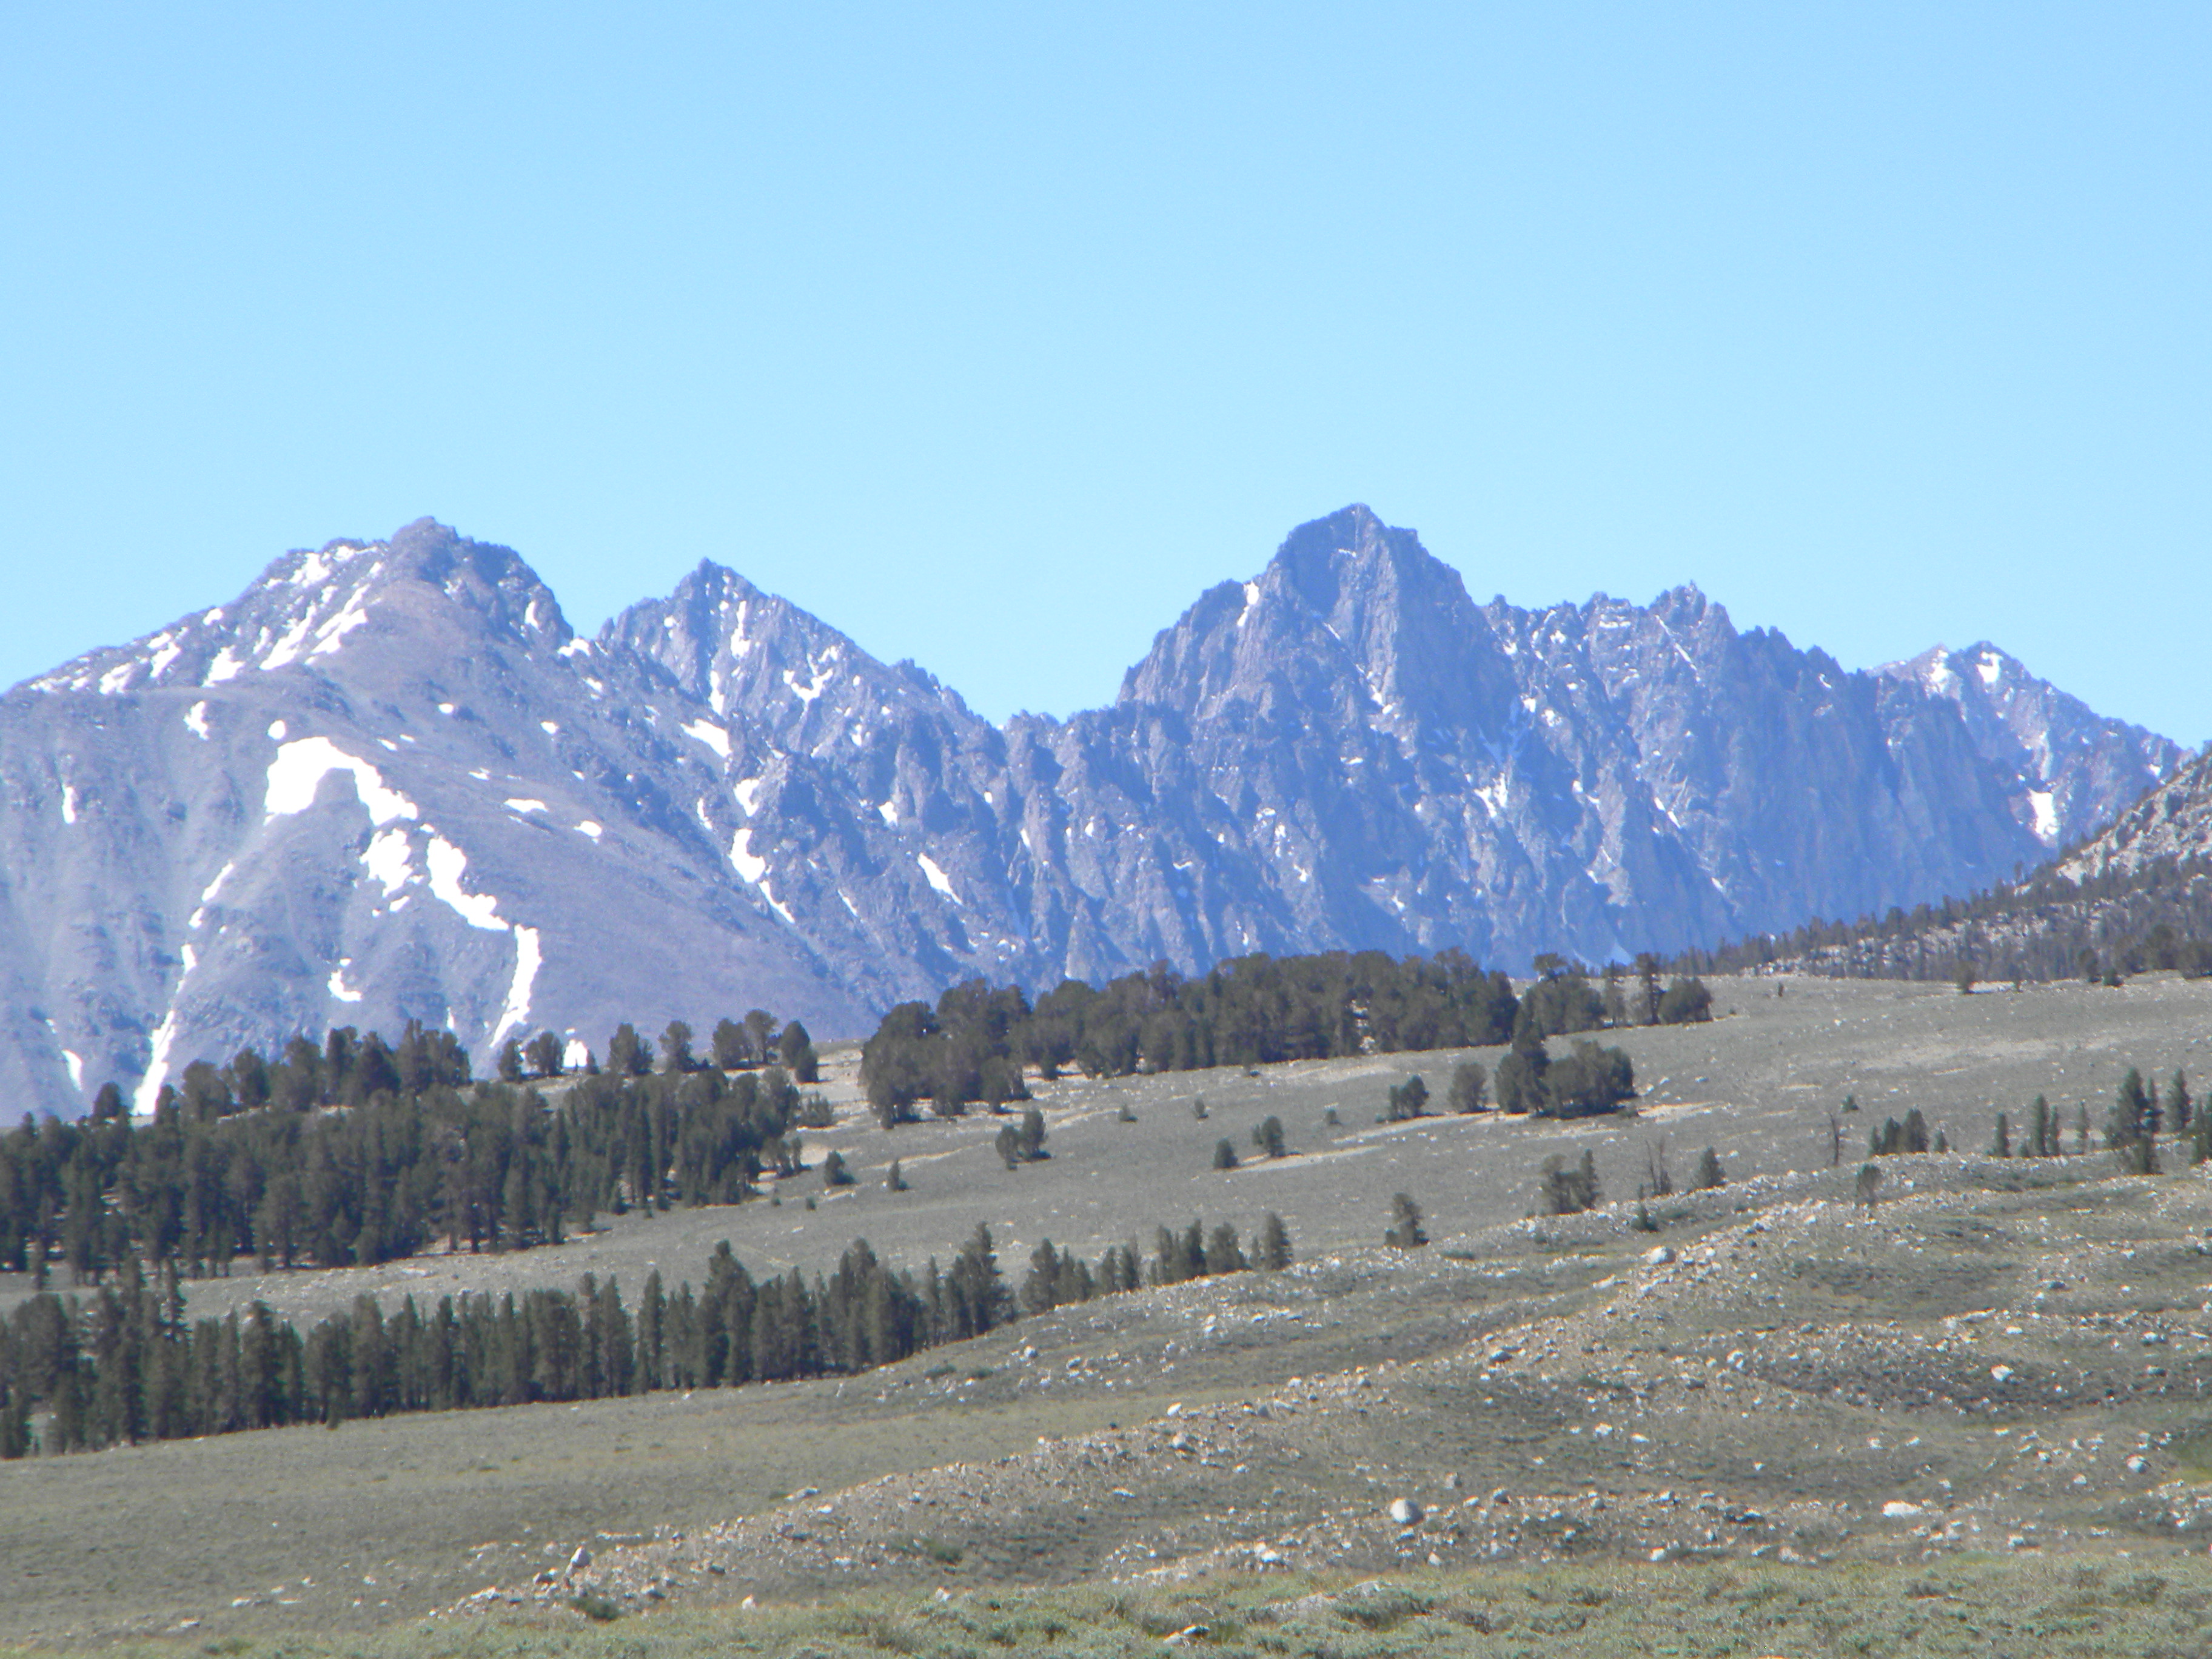 Inyo National Forest - White Mountain Ranger District